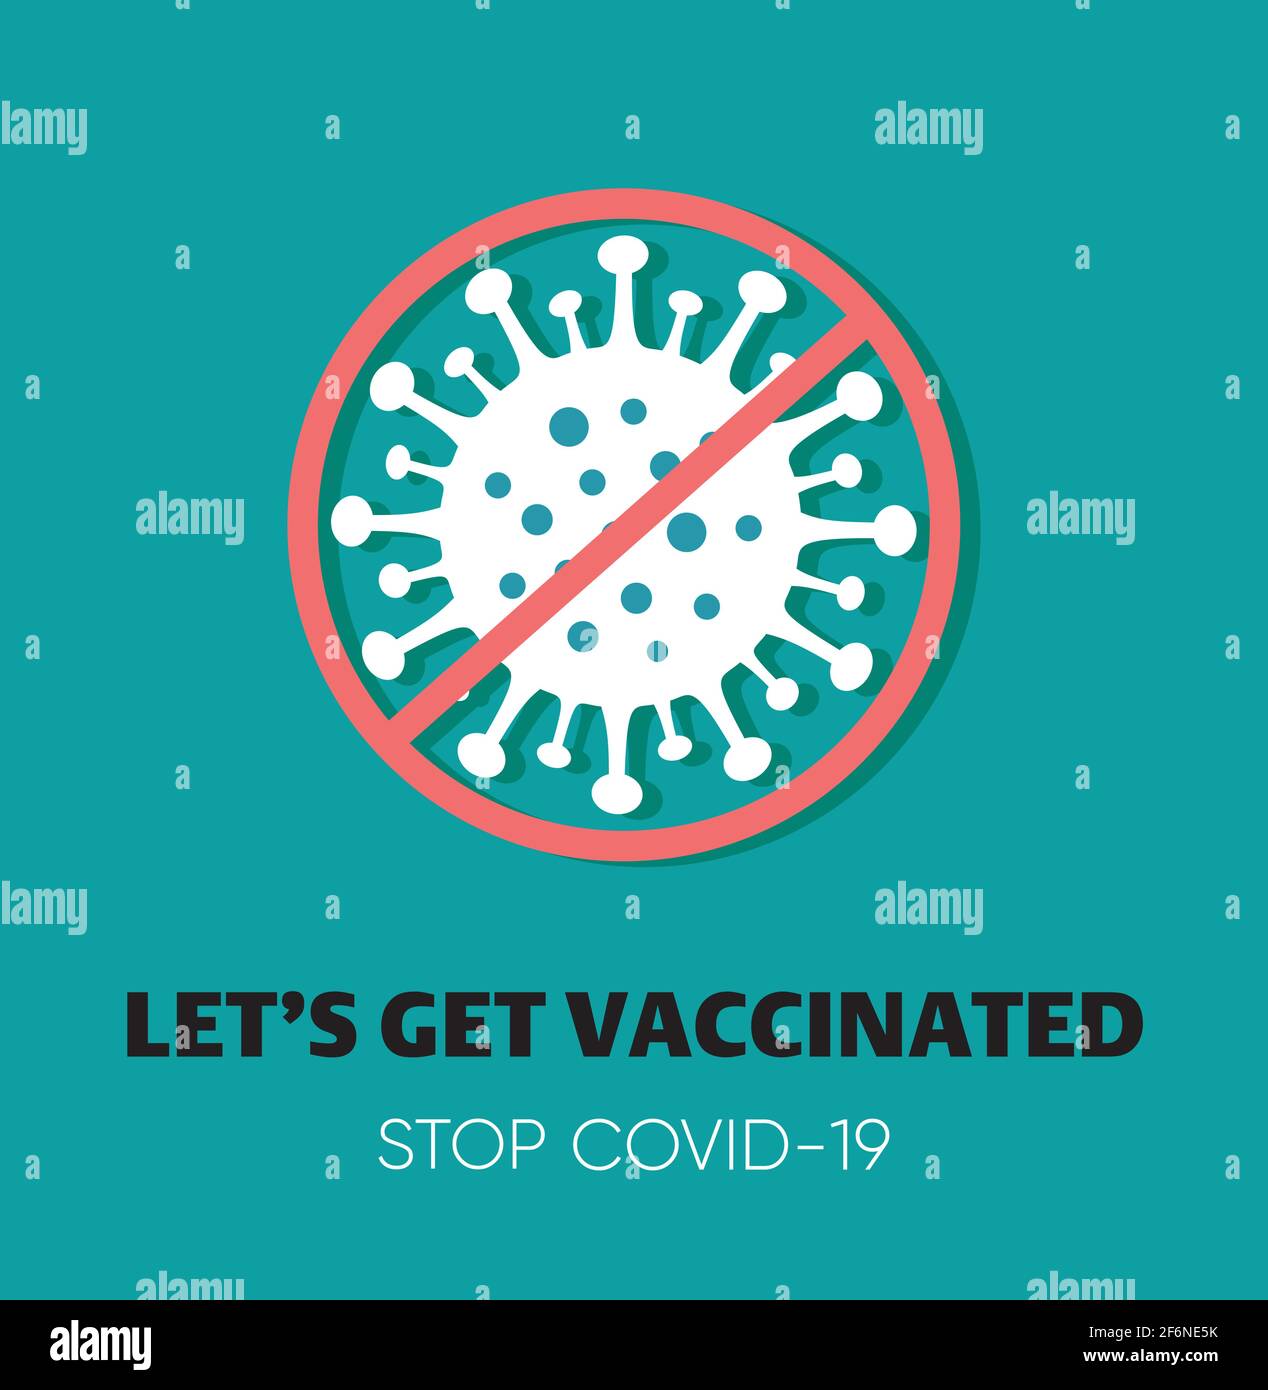 Covid-19 Vacctination Poster. Syringe with vaccine. Virus protection concept. Let's get vaccinated. Let's Stop Covid-19. Promotion. Encouragement. Stock Vector